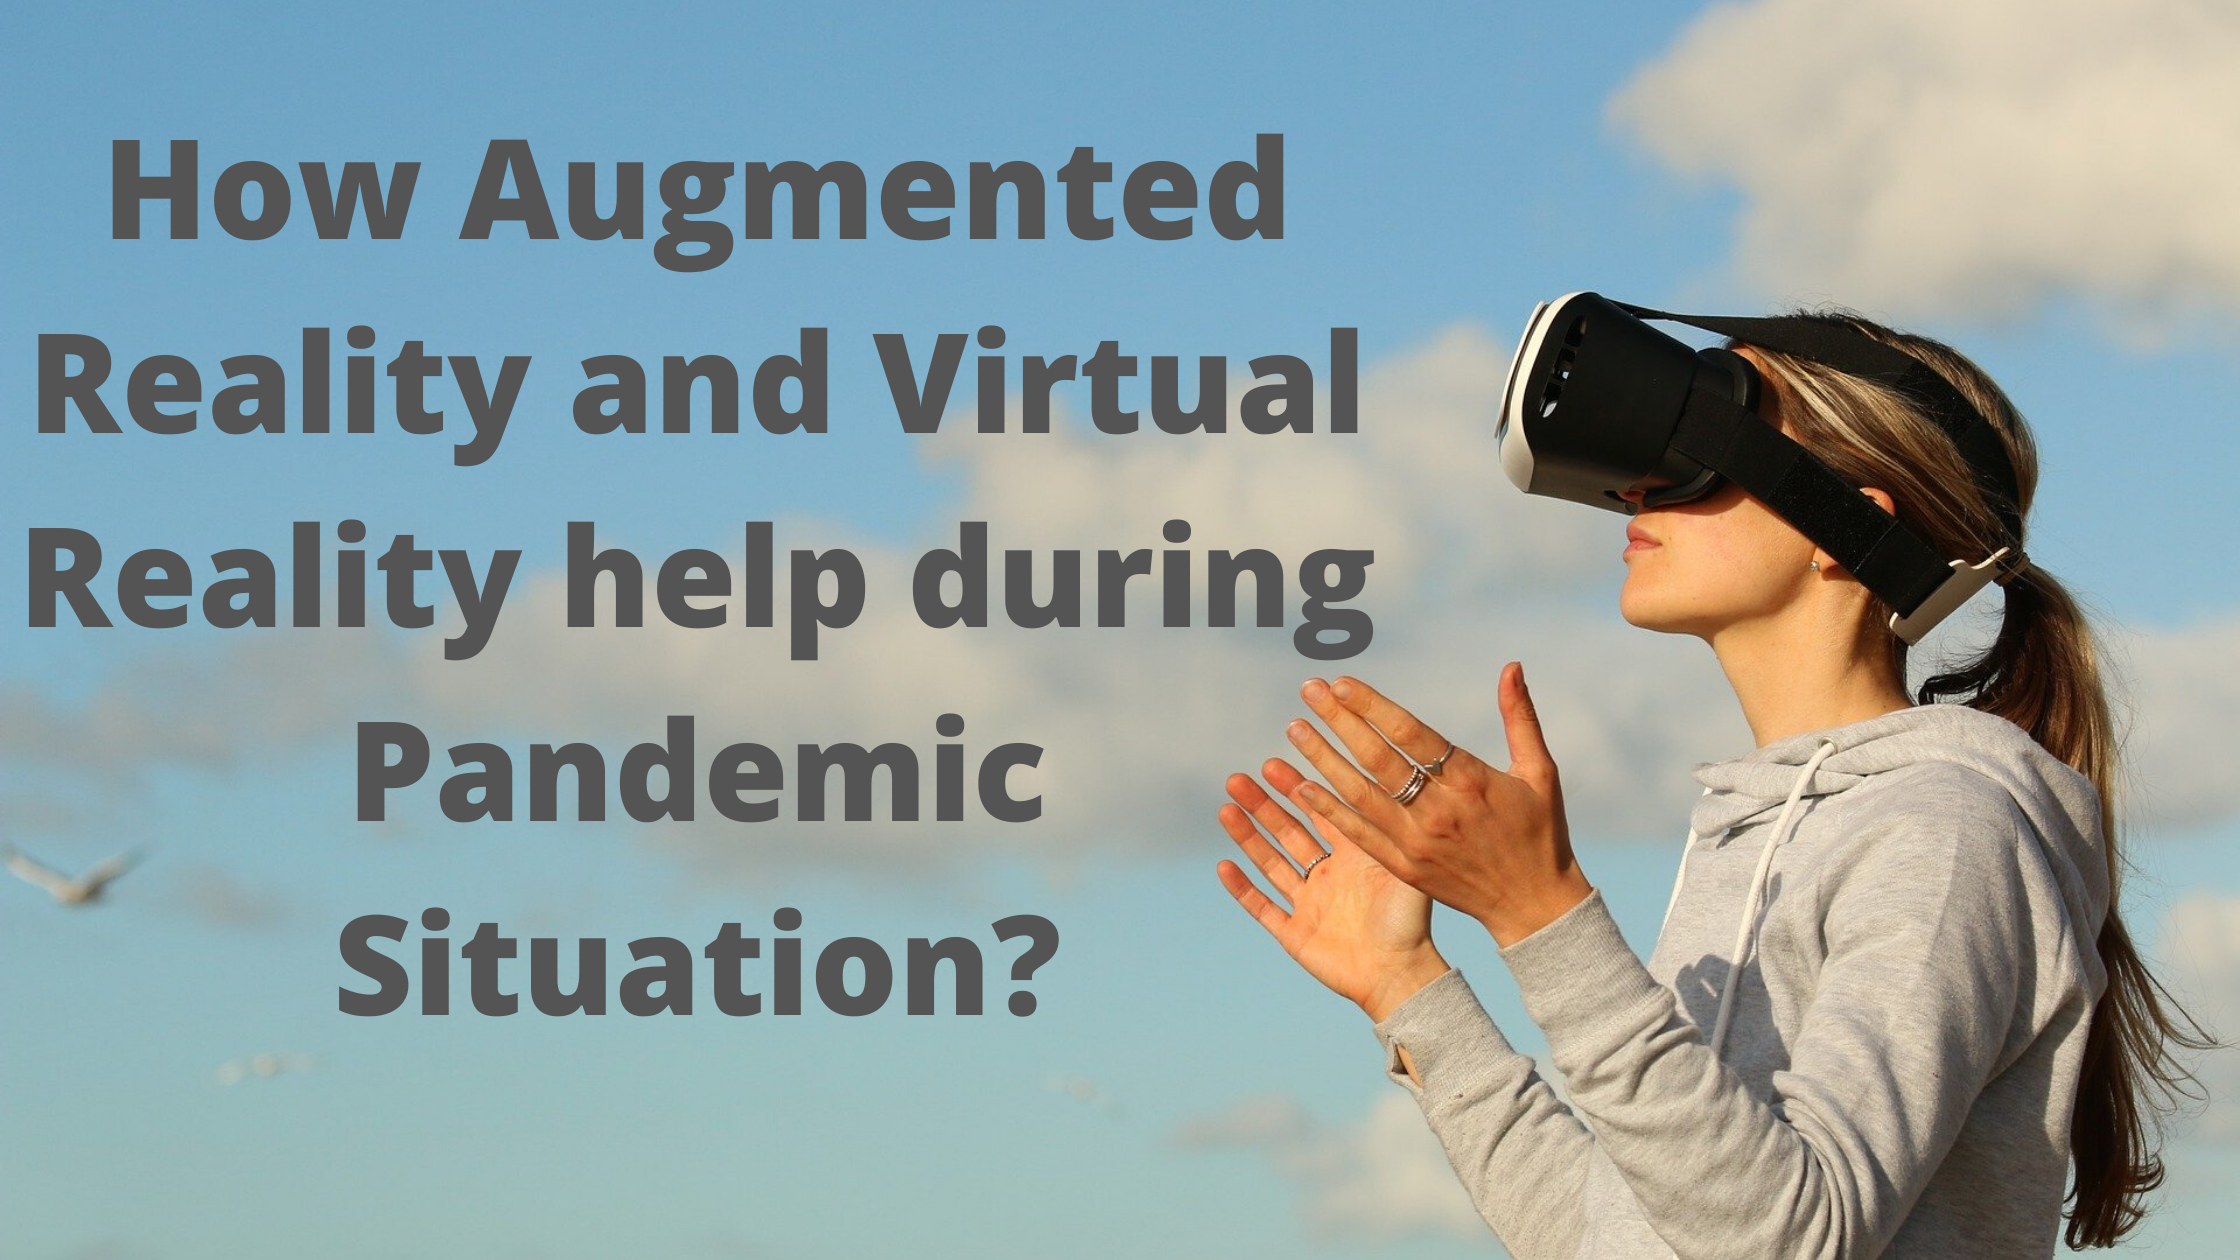 How Augmented Reality and Virtual Reality help during Pandemic Situation